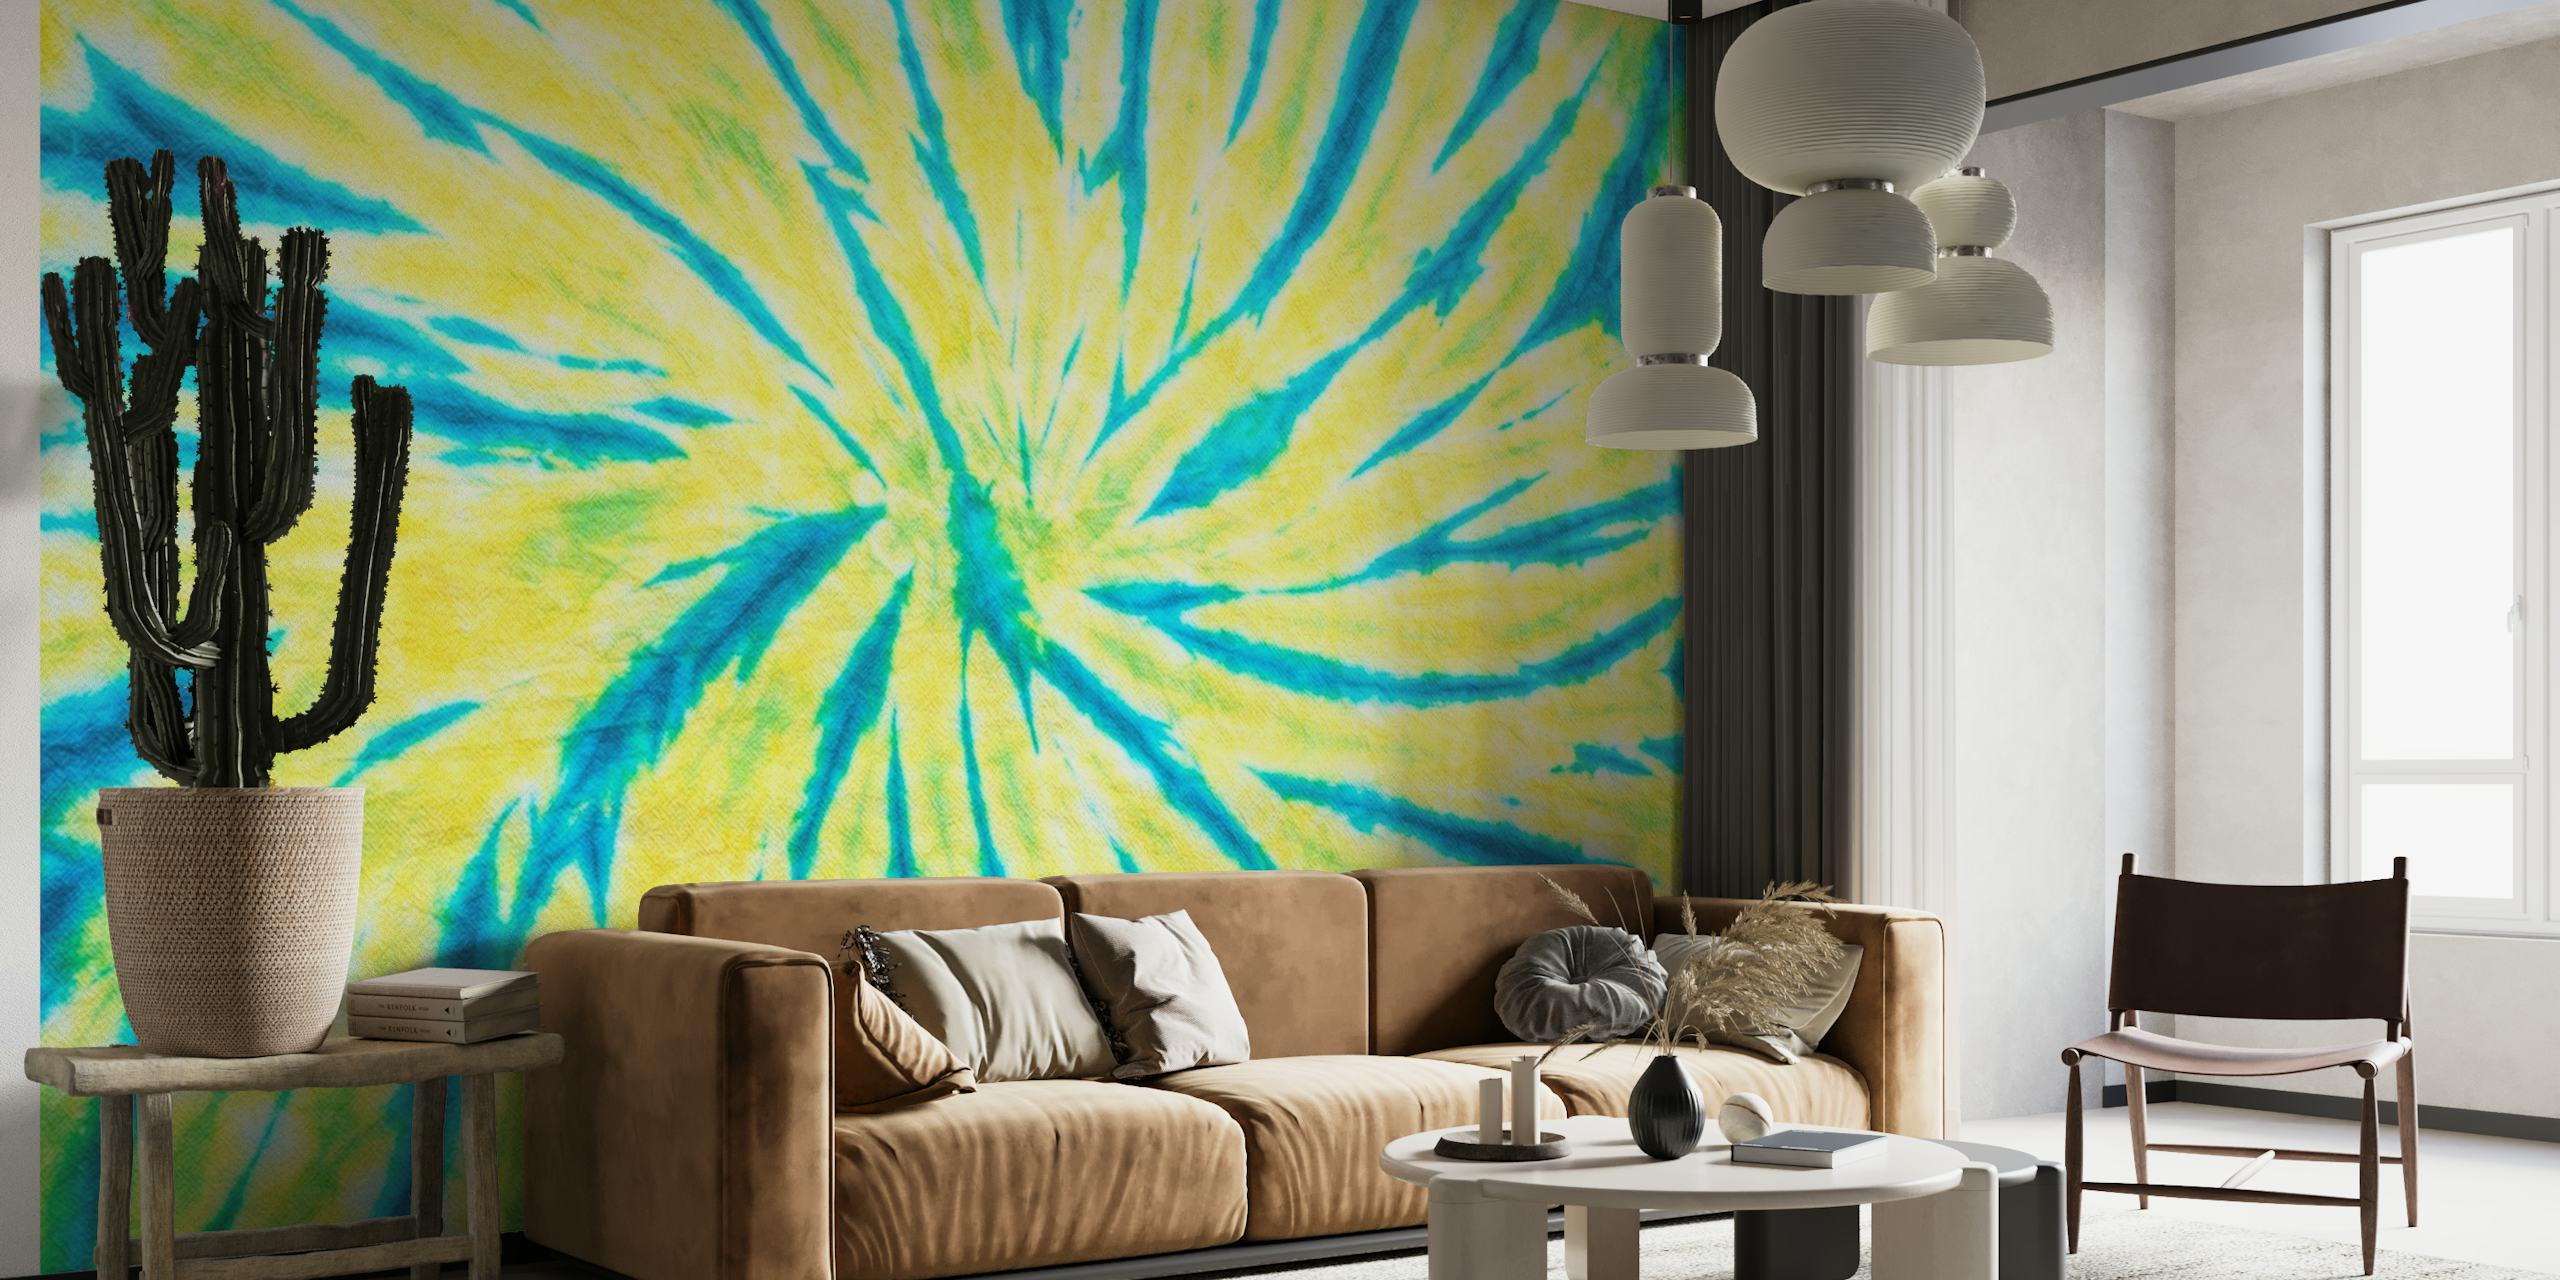 Yellow and Blue Tie Dye Wall Mural with swirling patterns